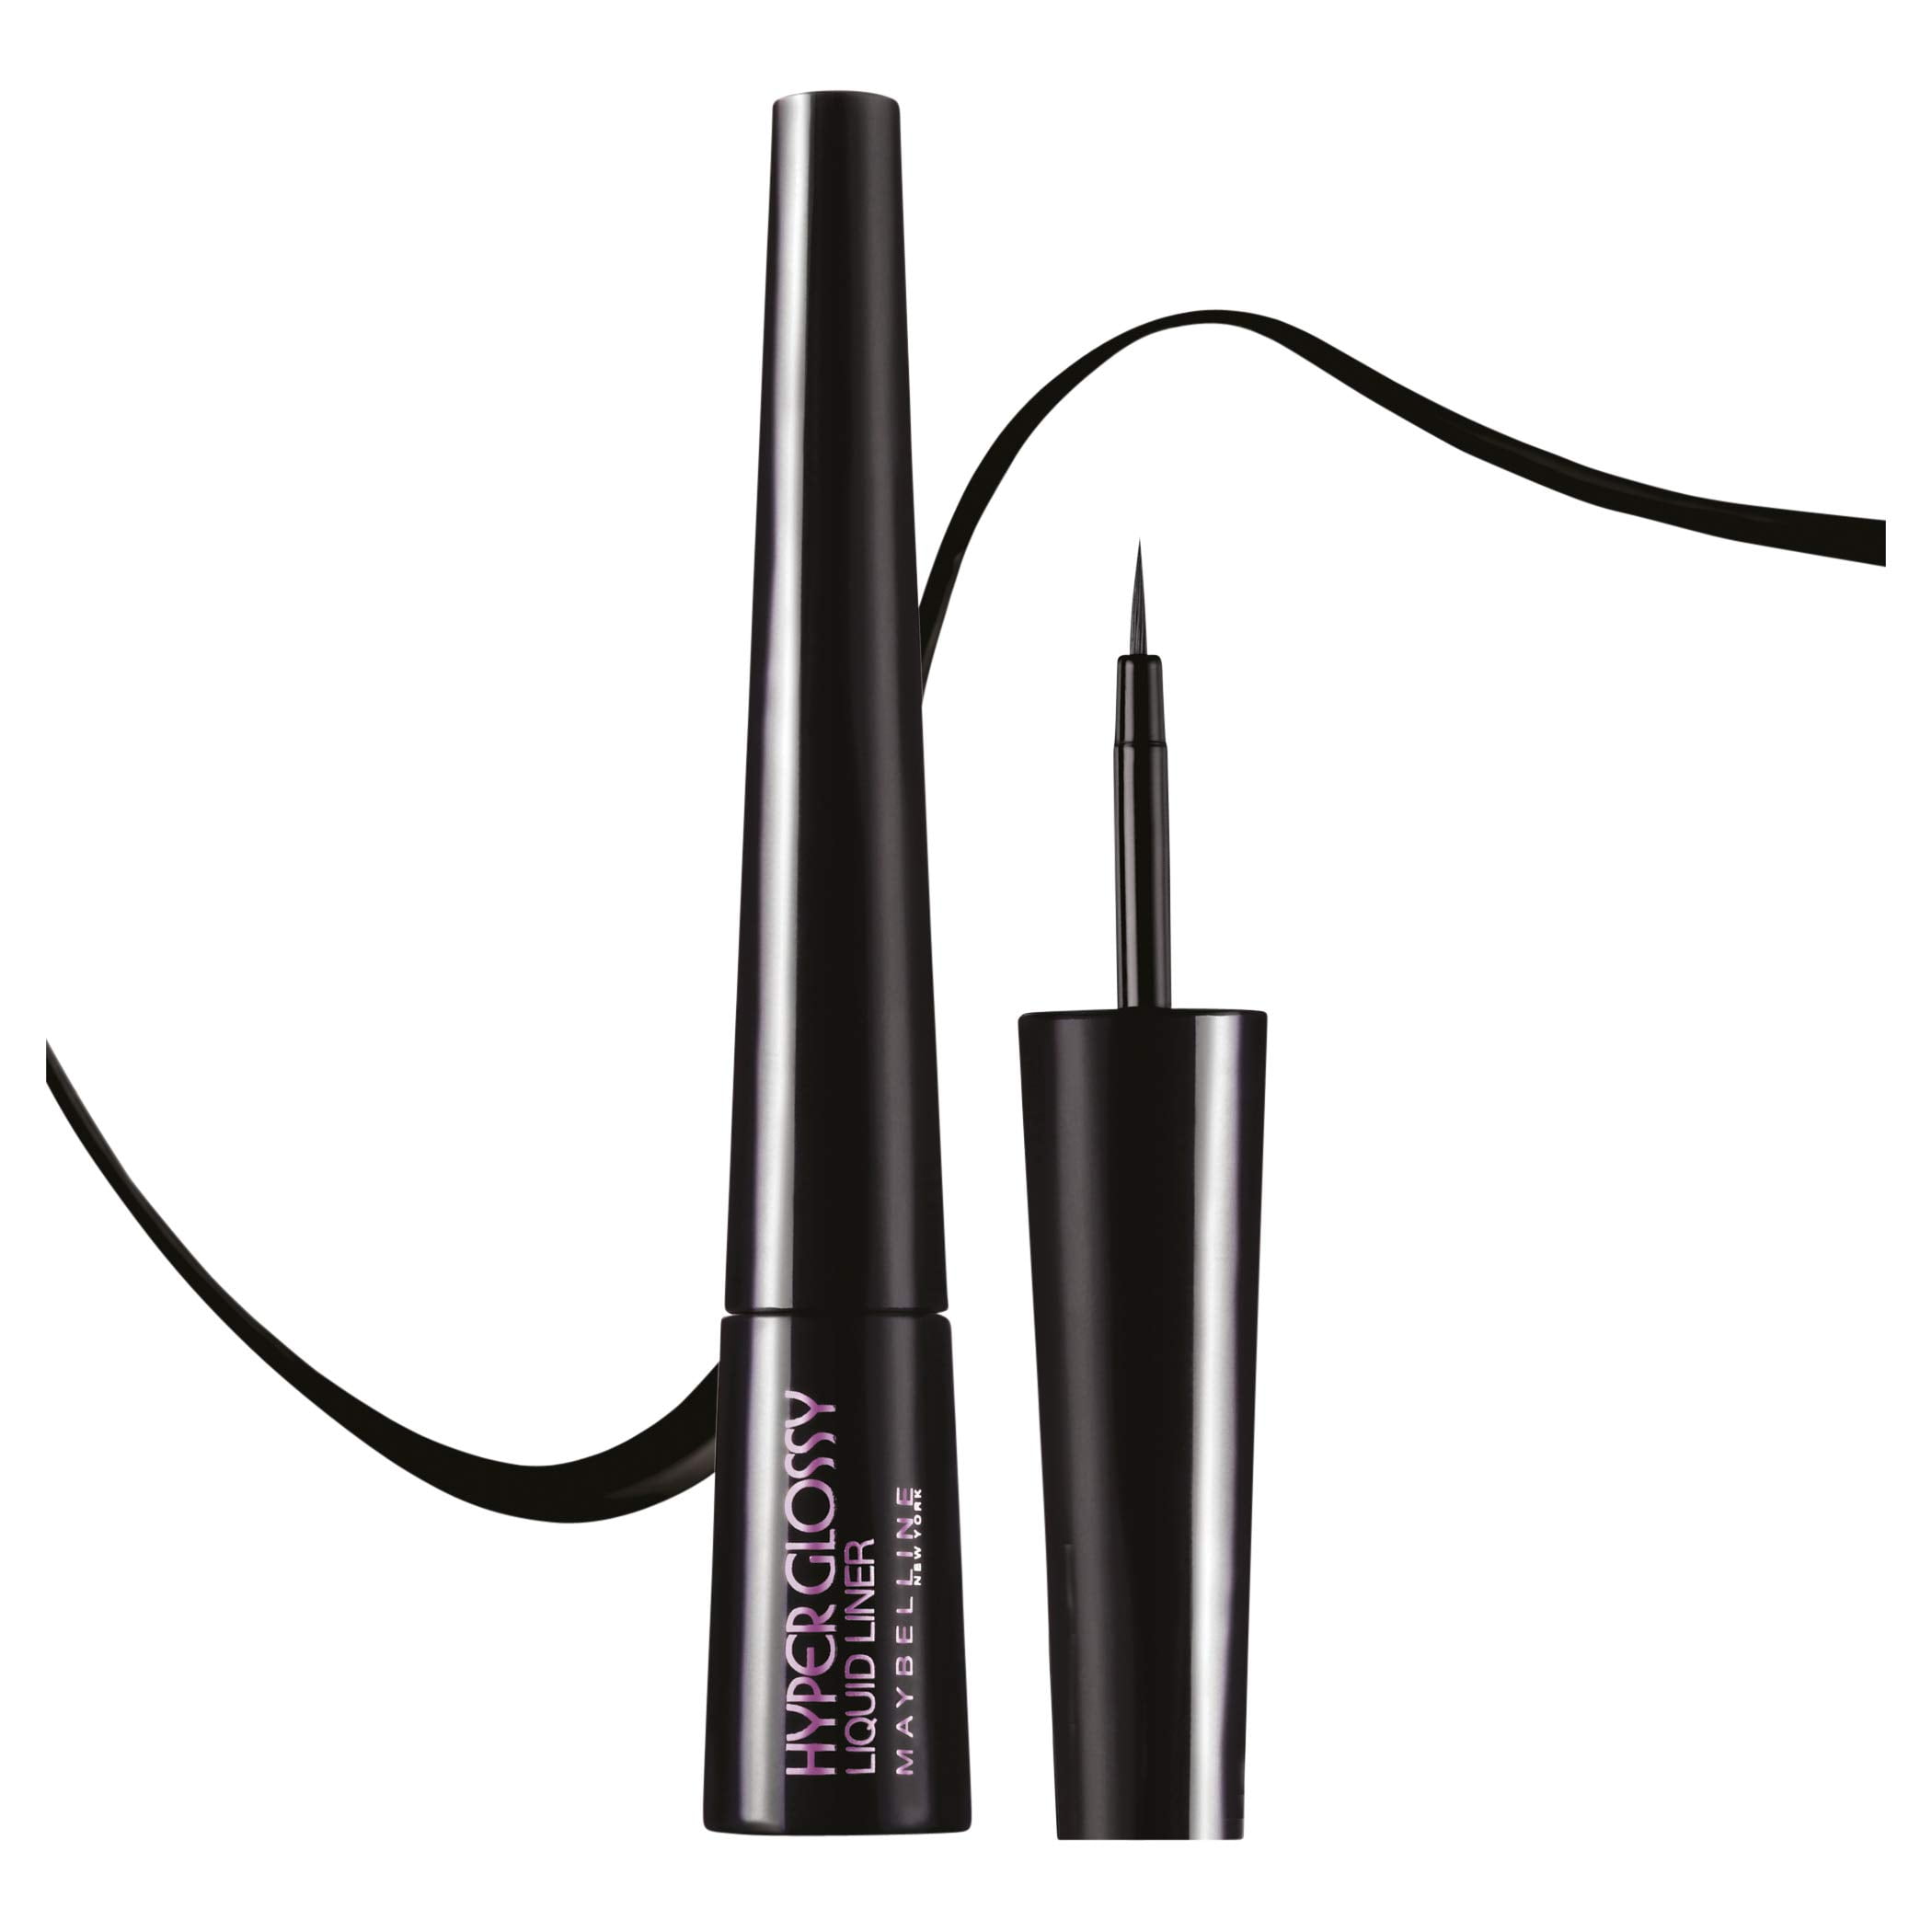 Maybelline Hyper Glossy Liquid Liner Black 3g Walmart Com Walmart Com Choose from contactless same day delivery, drive up and more. maybelline hyper glossy liquid liner black 3g walmart com